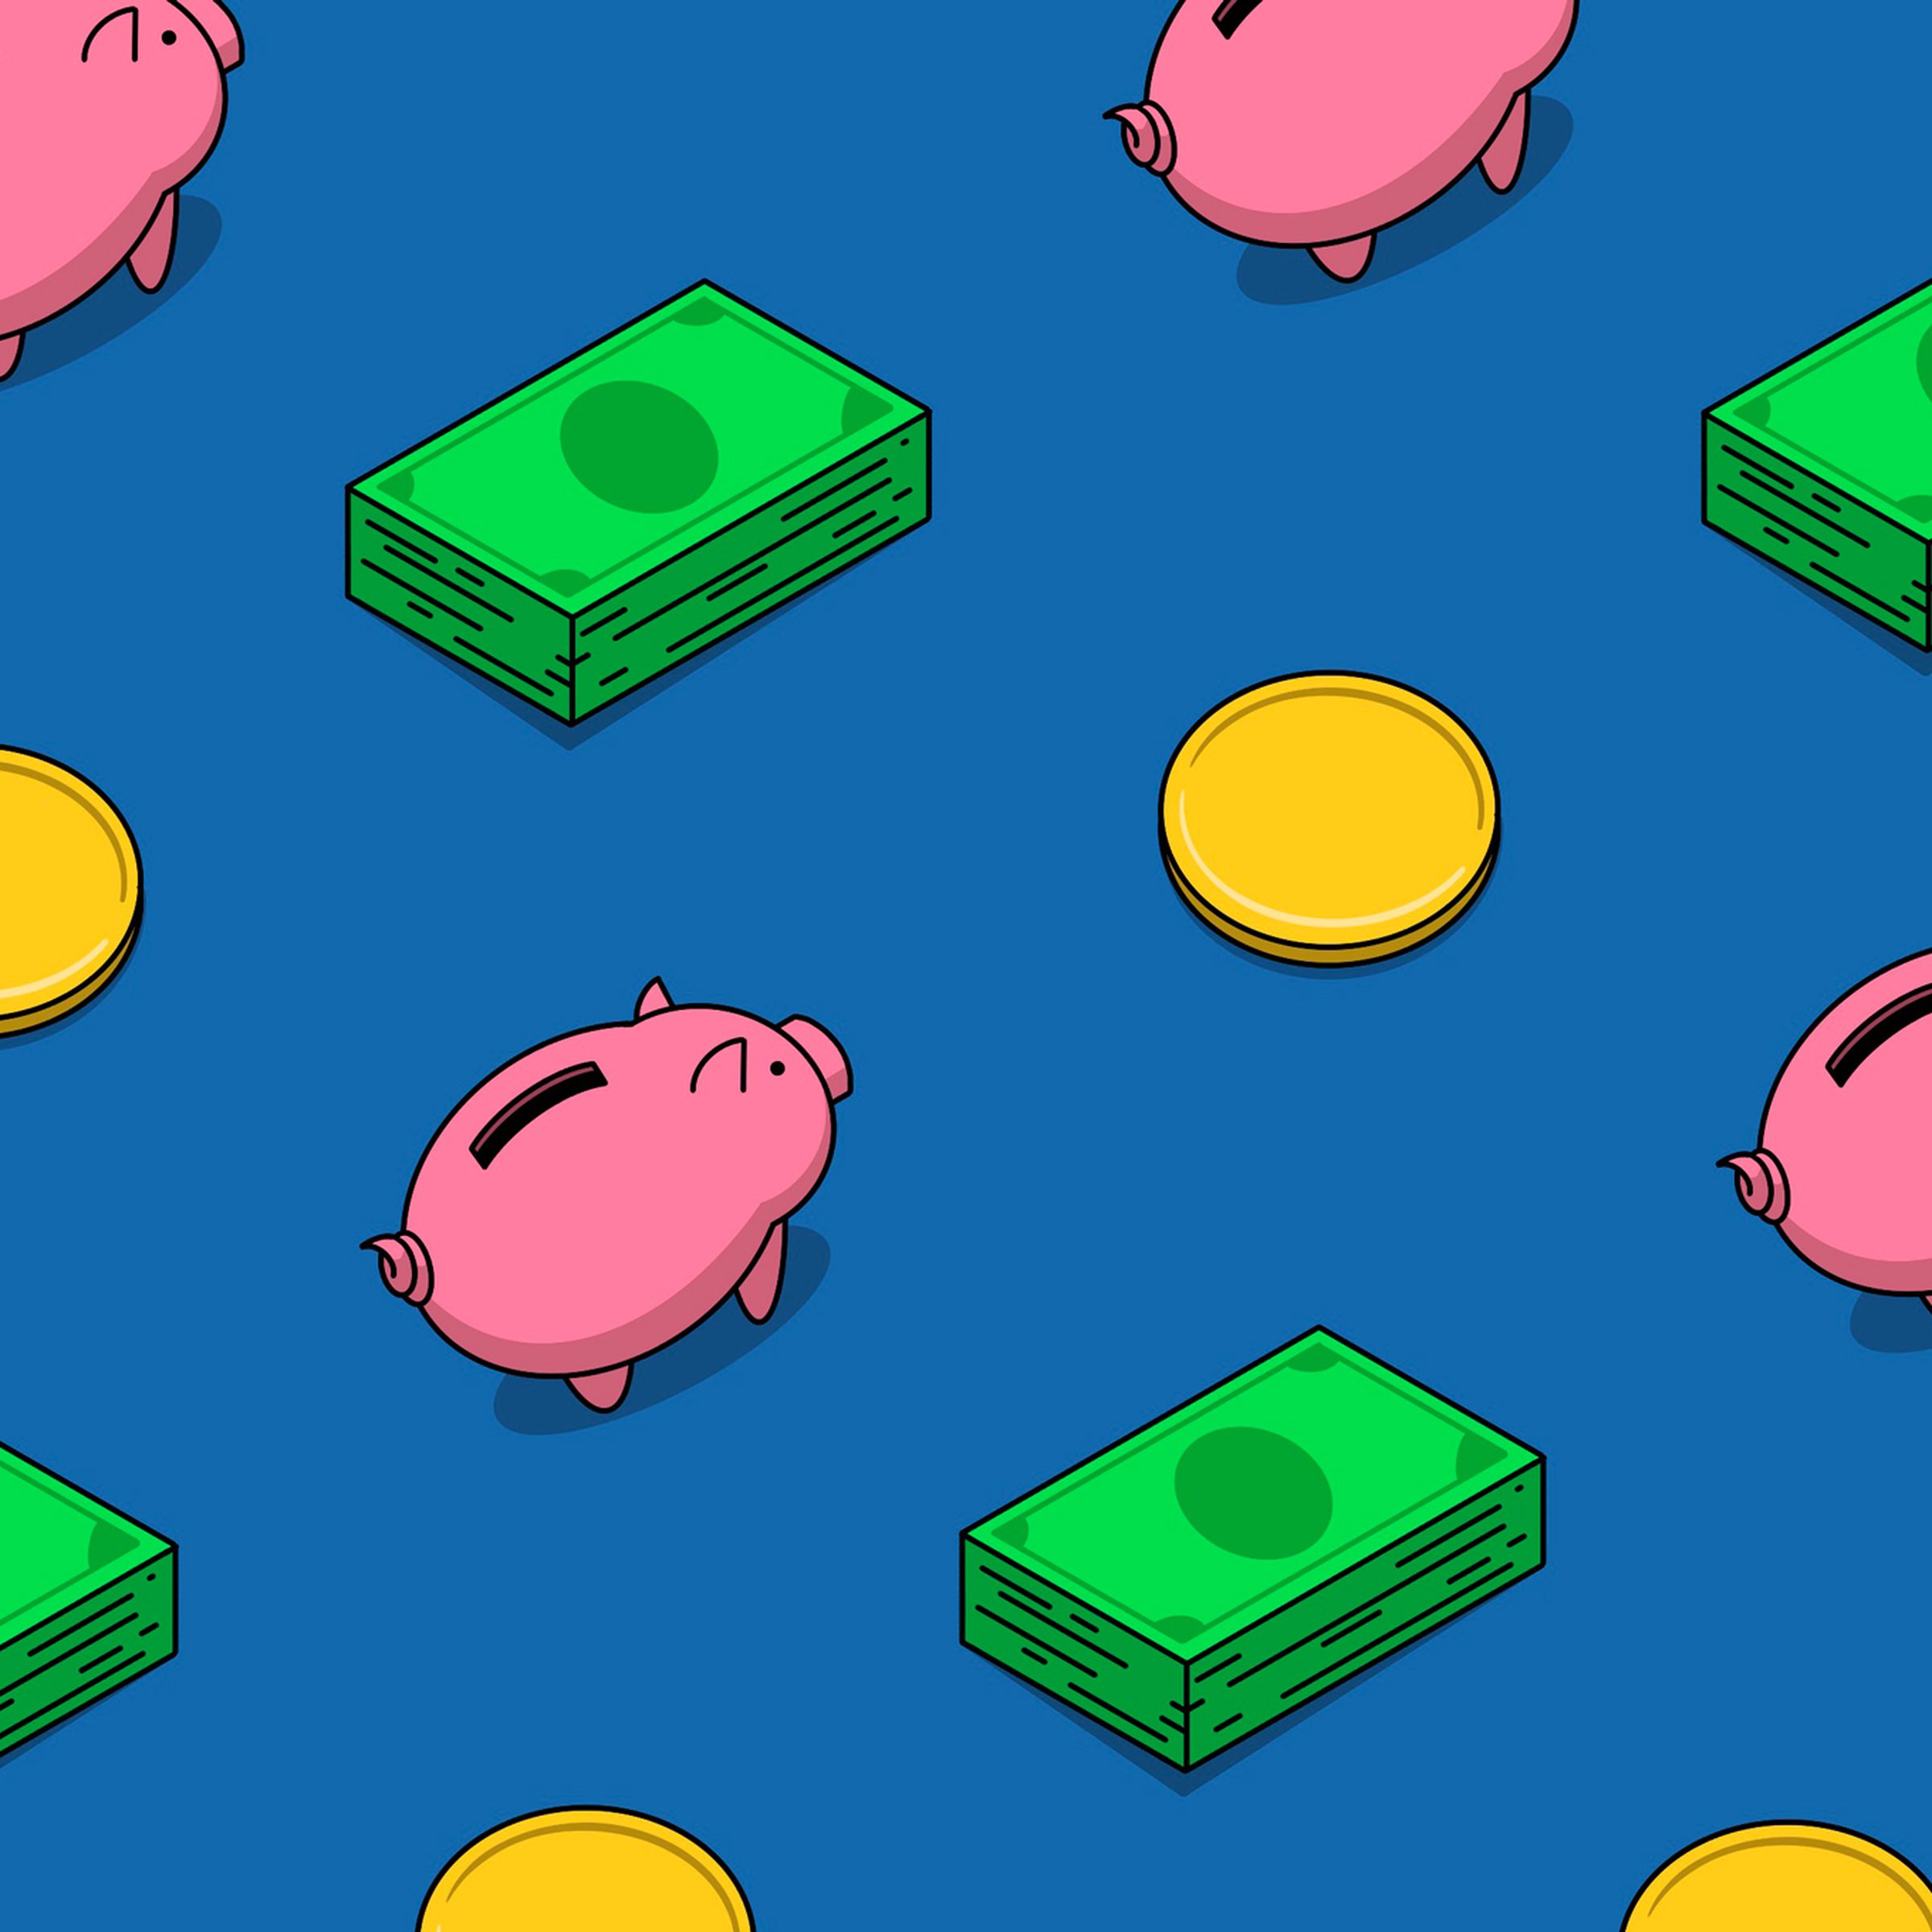 An illustration of a piggy bank, a pile of cash, and some coins